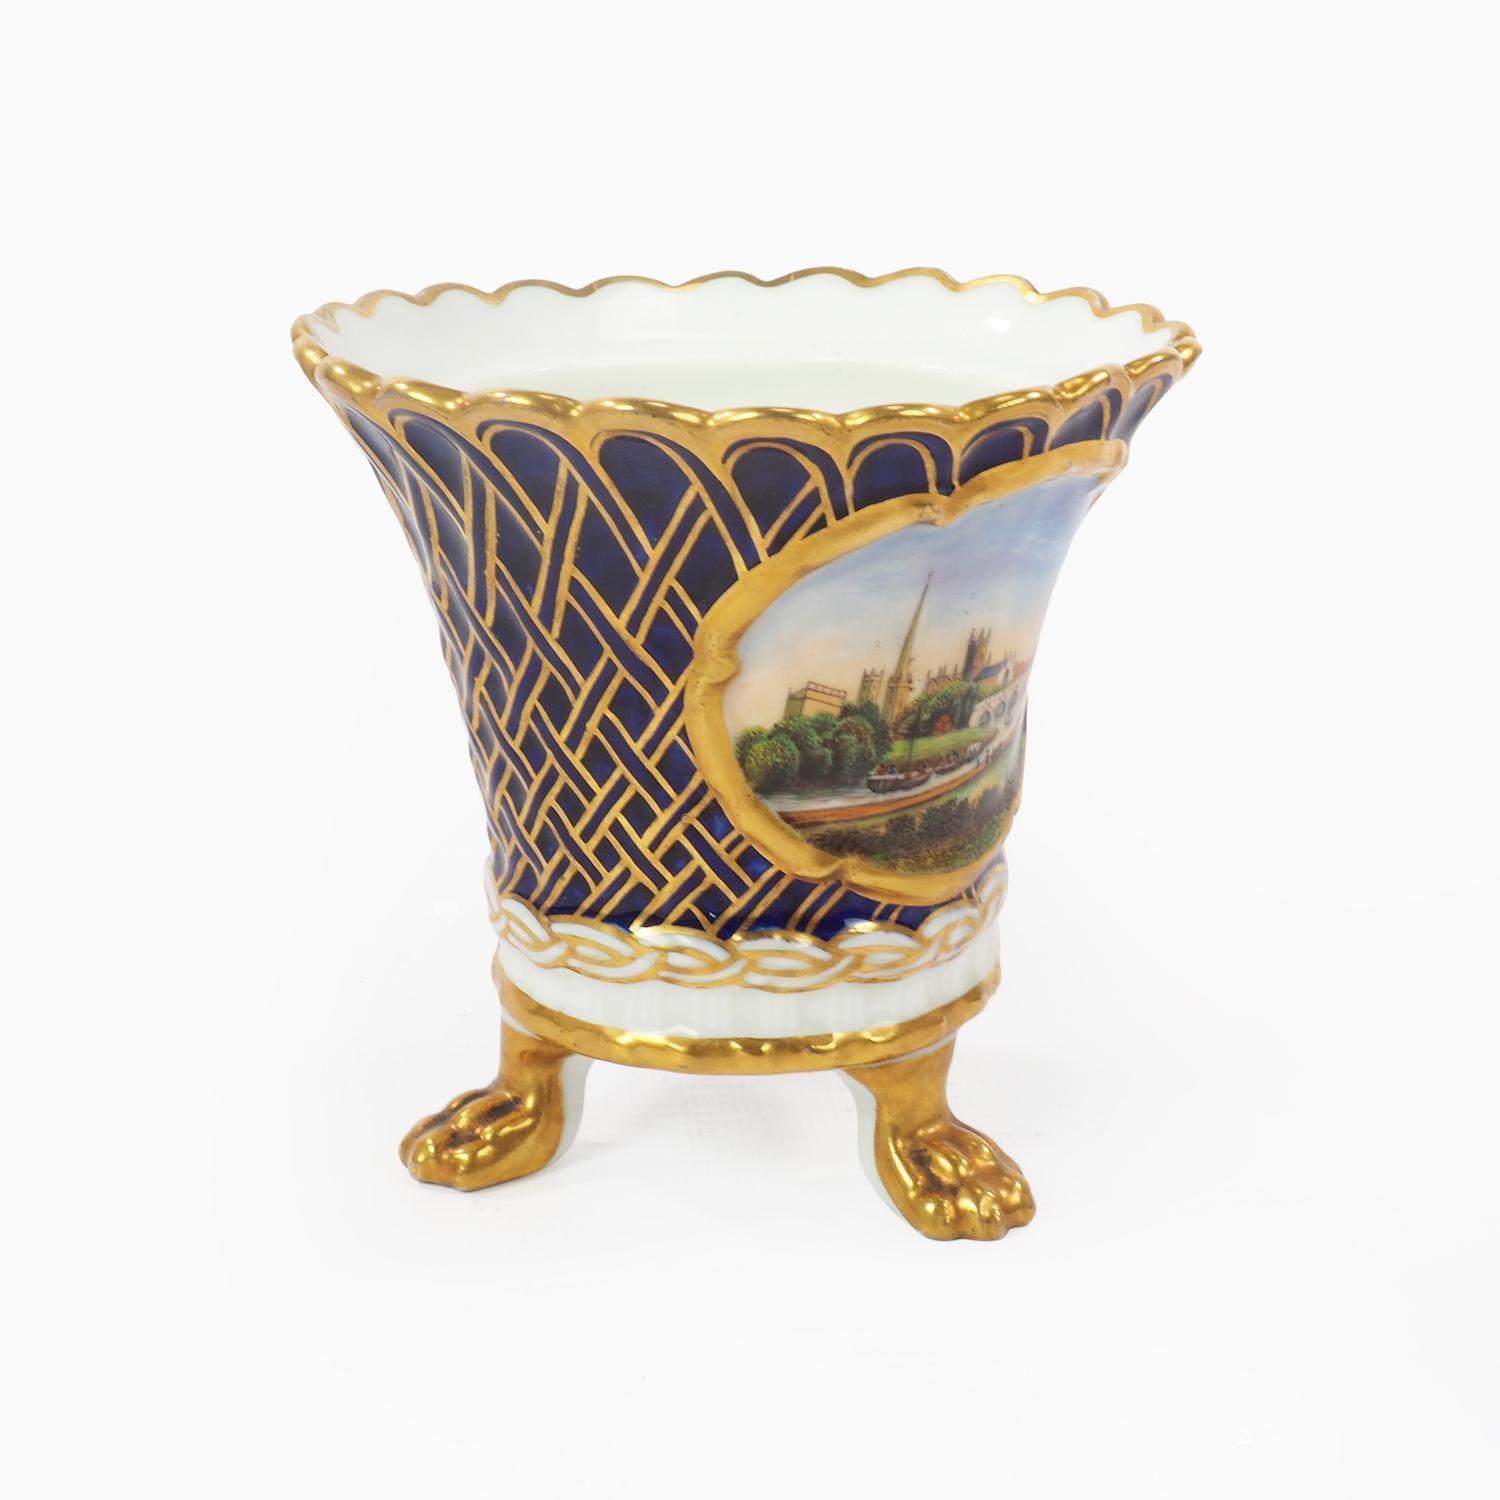 Chamberlain Worcester three footed porcelain pot or vase of the French style decorated with gilded lion’s feet and cobalt and gilt trellis with a hand painted panel depicting a view of the city of Worcester and its cathedral. Signed Worcester